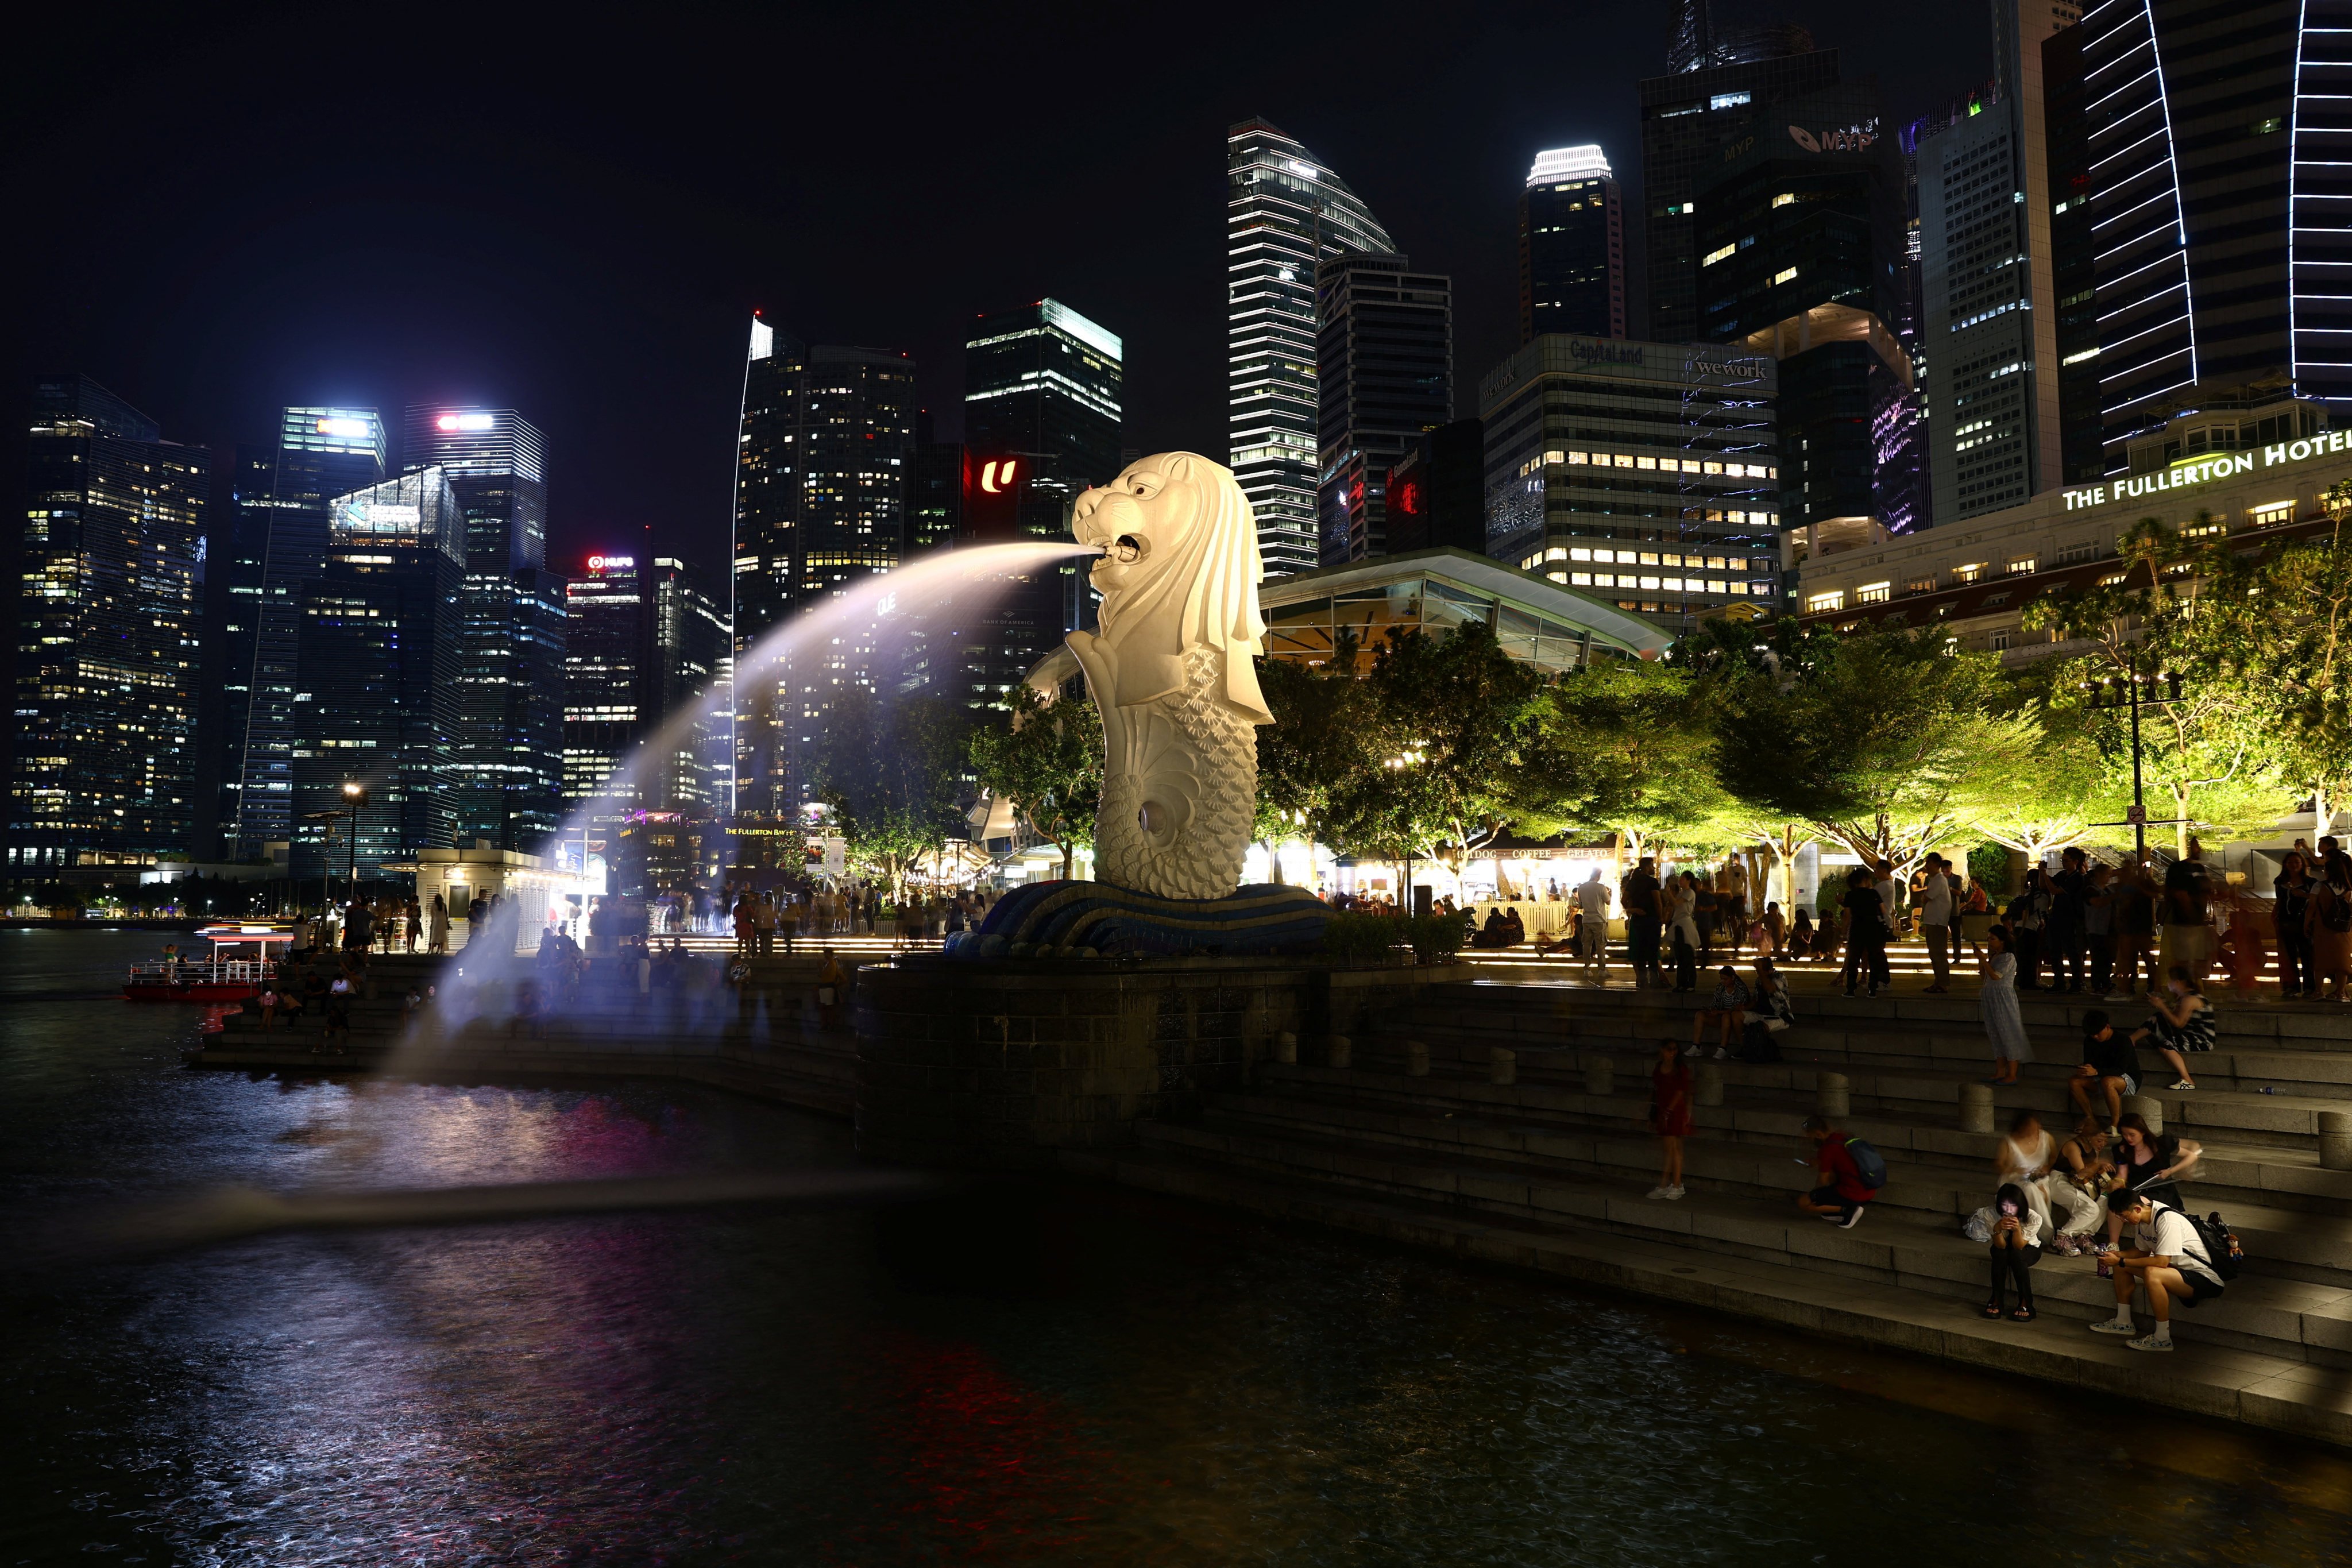 Singapore’s Merlion Park and central business district. The accused was upset about his girlfriend’s relationships with other men when he punched and kicked her, the court heard. Photo: Reuters